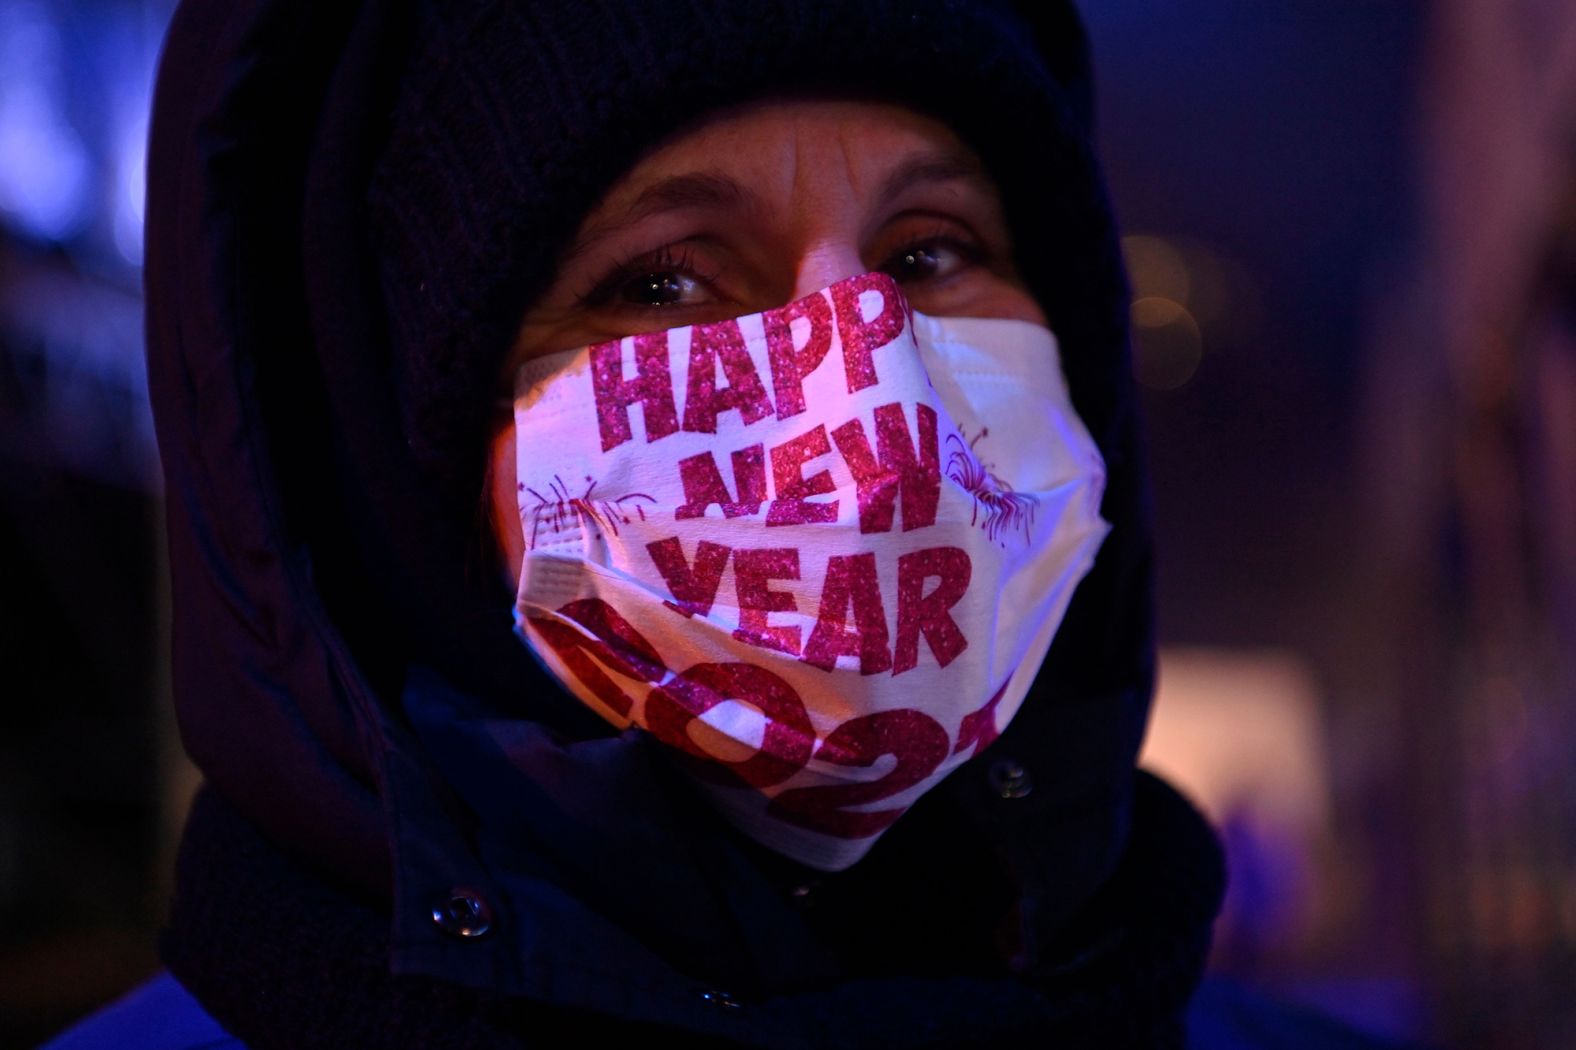 A member of the security staff at a concert in Berlin wears a face mask that reads "Happy New Year 2021."